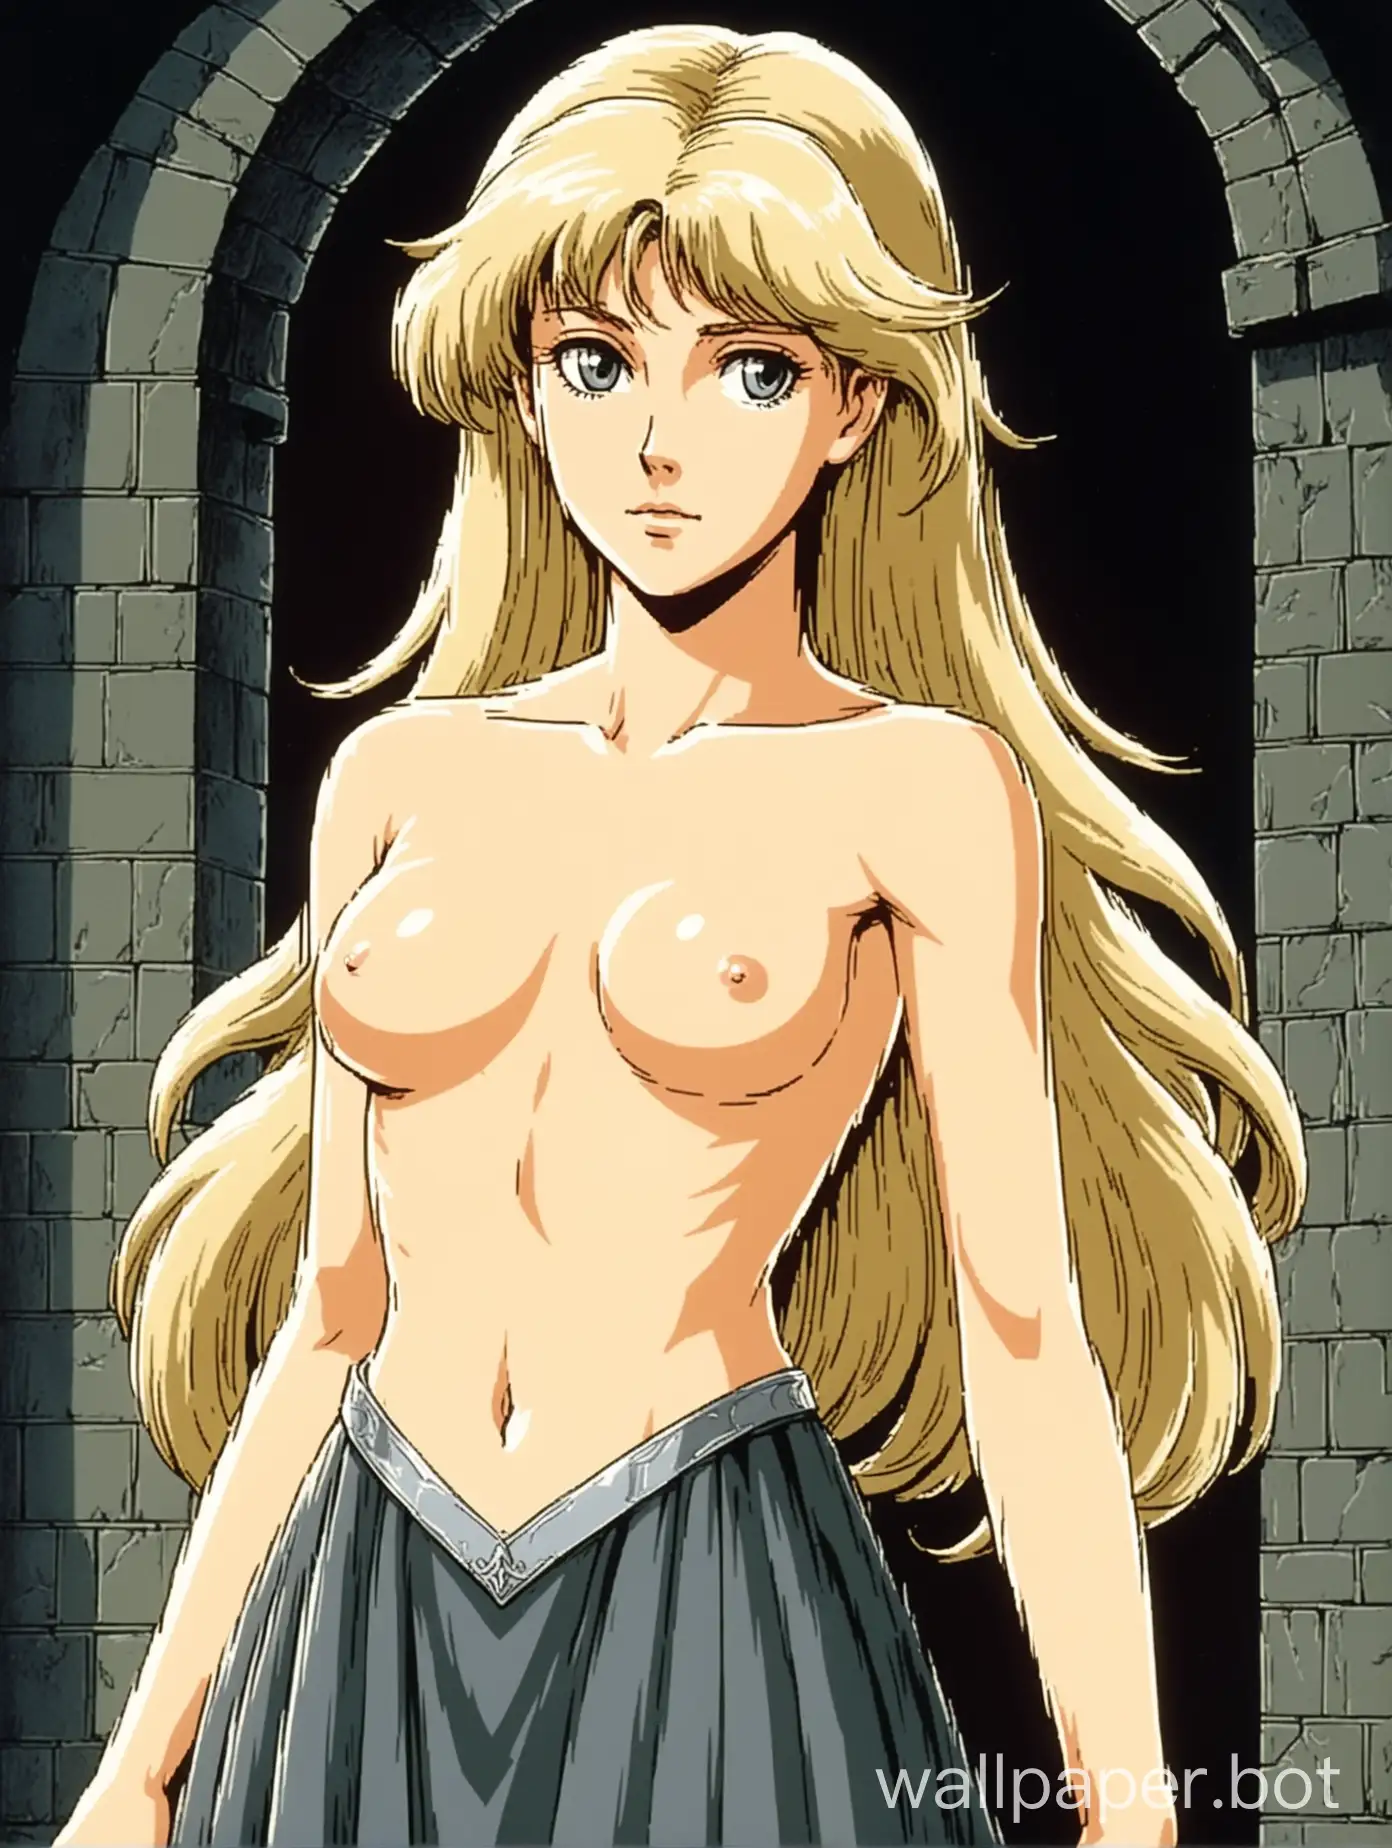 portrait of a young and attractive white woman topless, exposed chest, nice breasts, thin sharp face, she has long wavy white-blonde hair, standing regally, elegant and slender, wearing a sheer dark grey skirt, topless, medieval elegance, 1980s retro anime